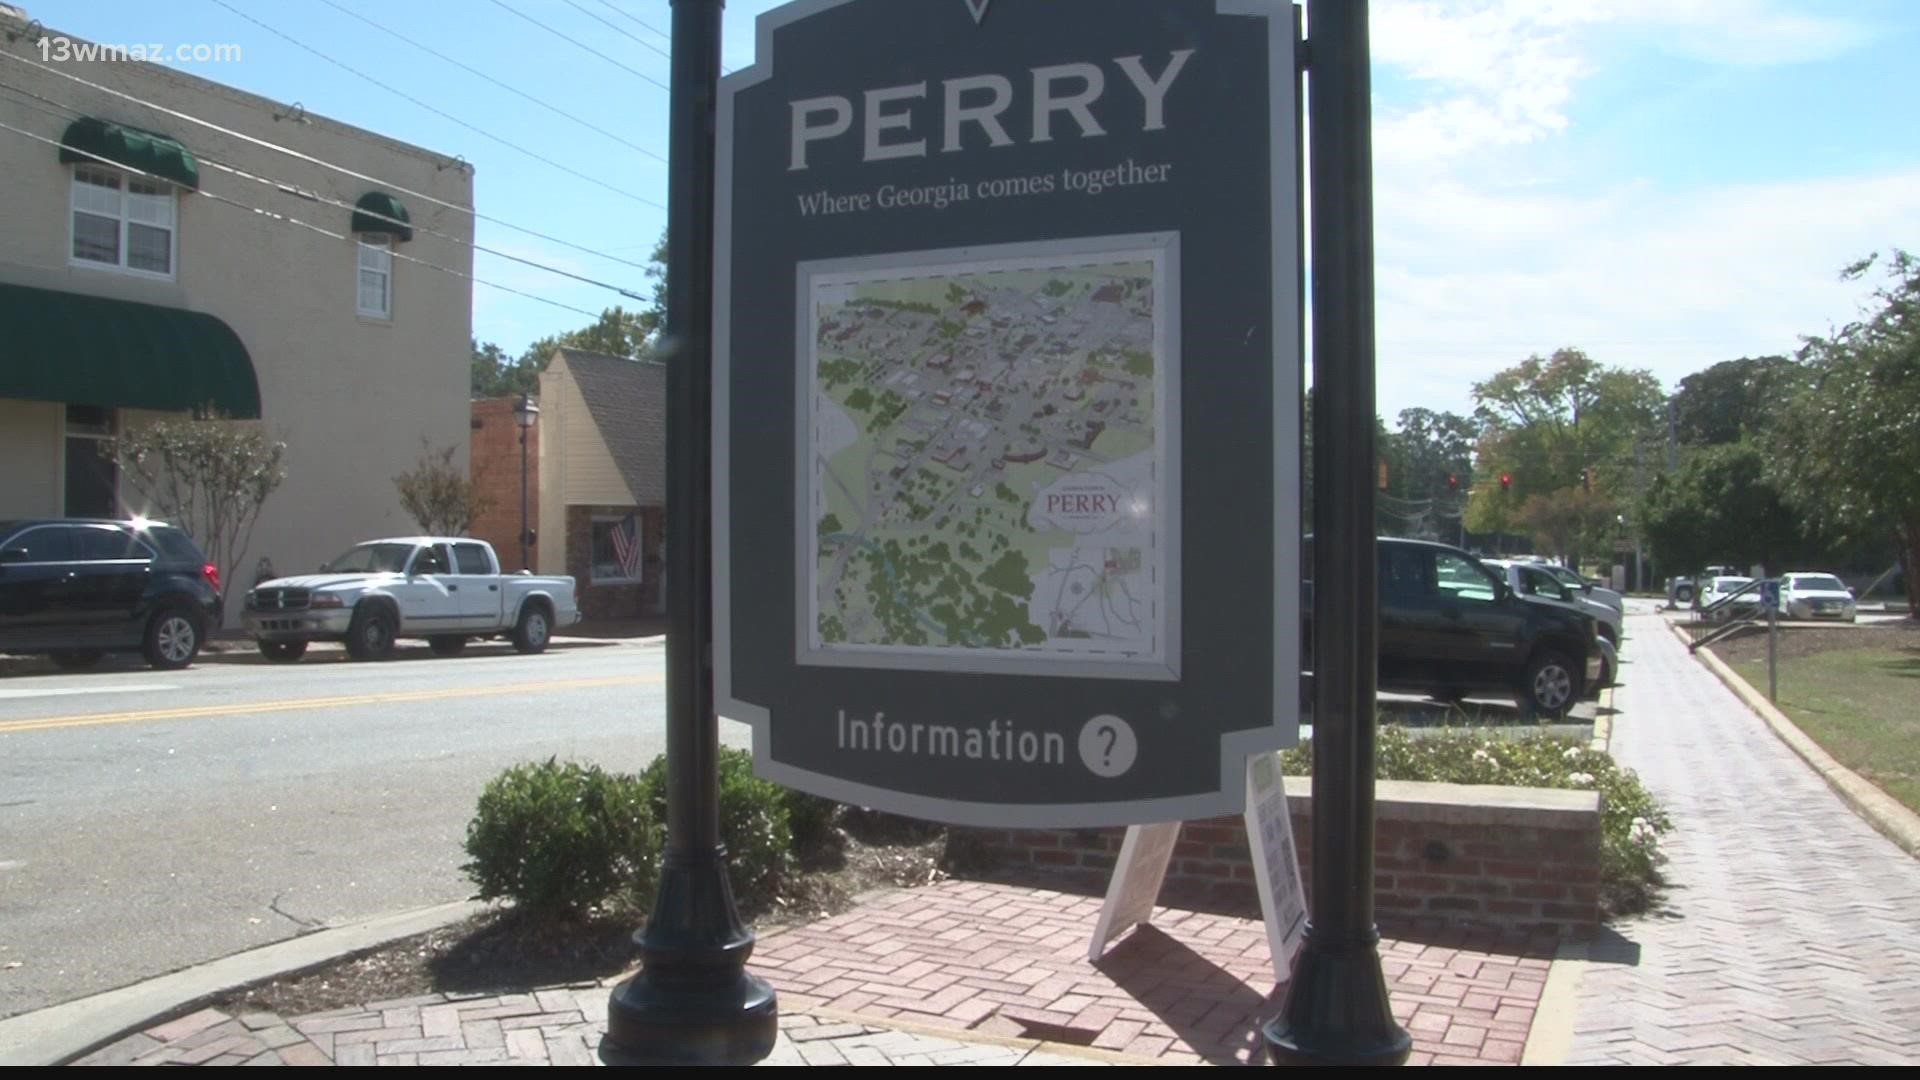 Perry has approved cameras in first priority high profile locations like the city's event center and its Creekwood Park, areas they say see larger crowds.